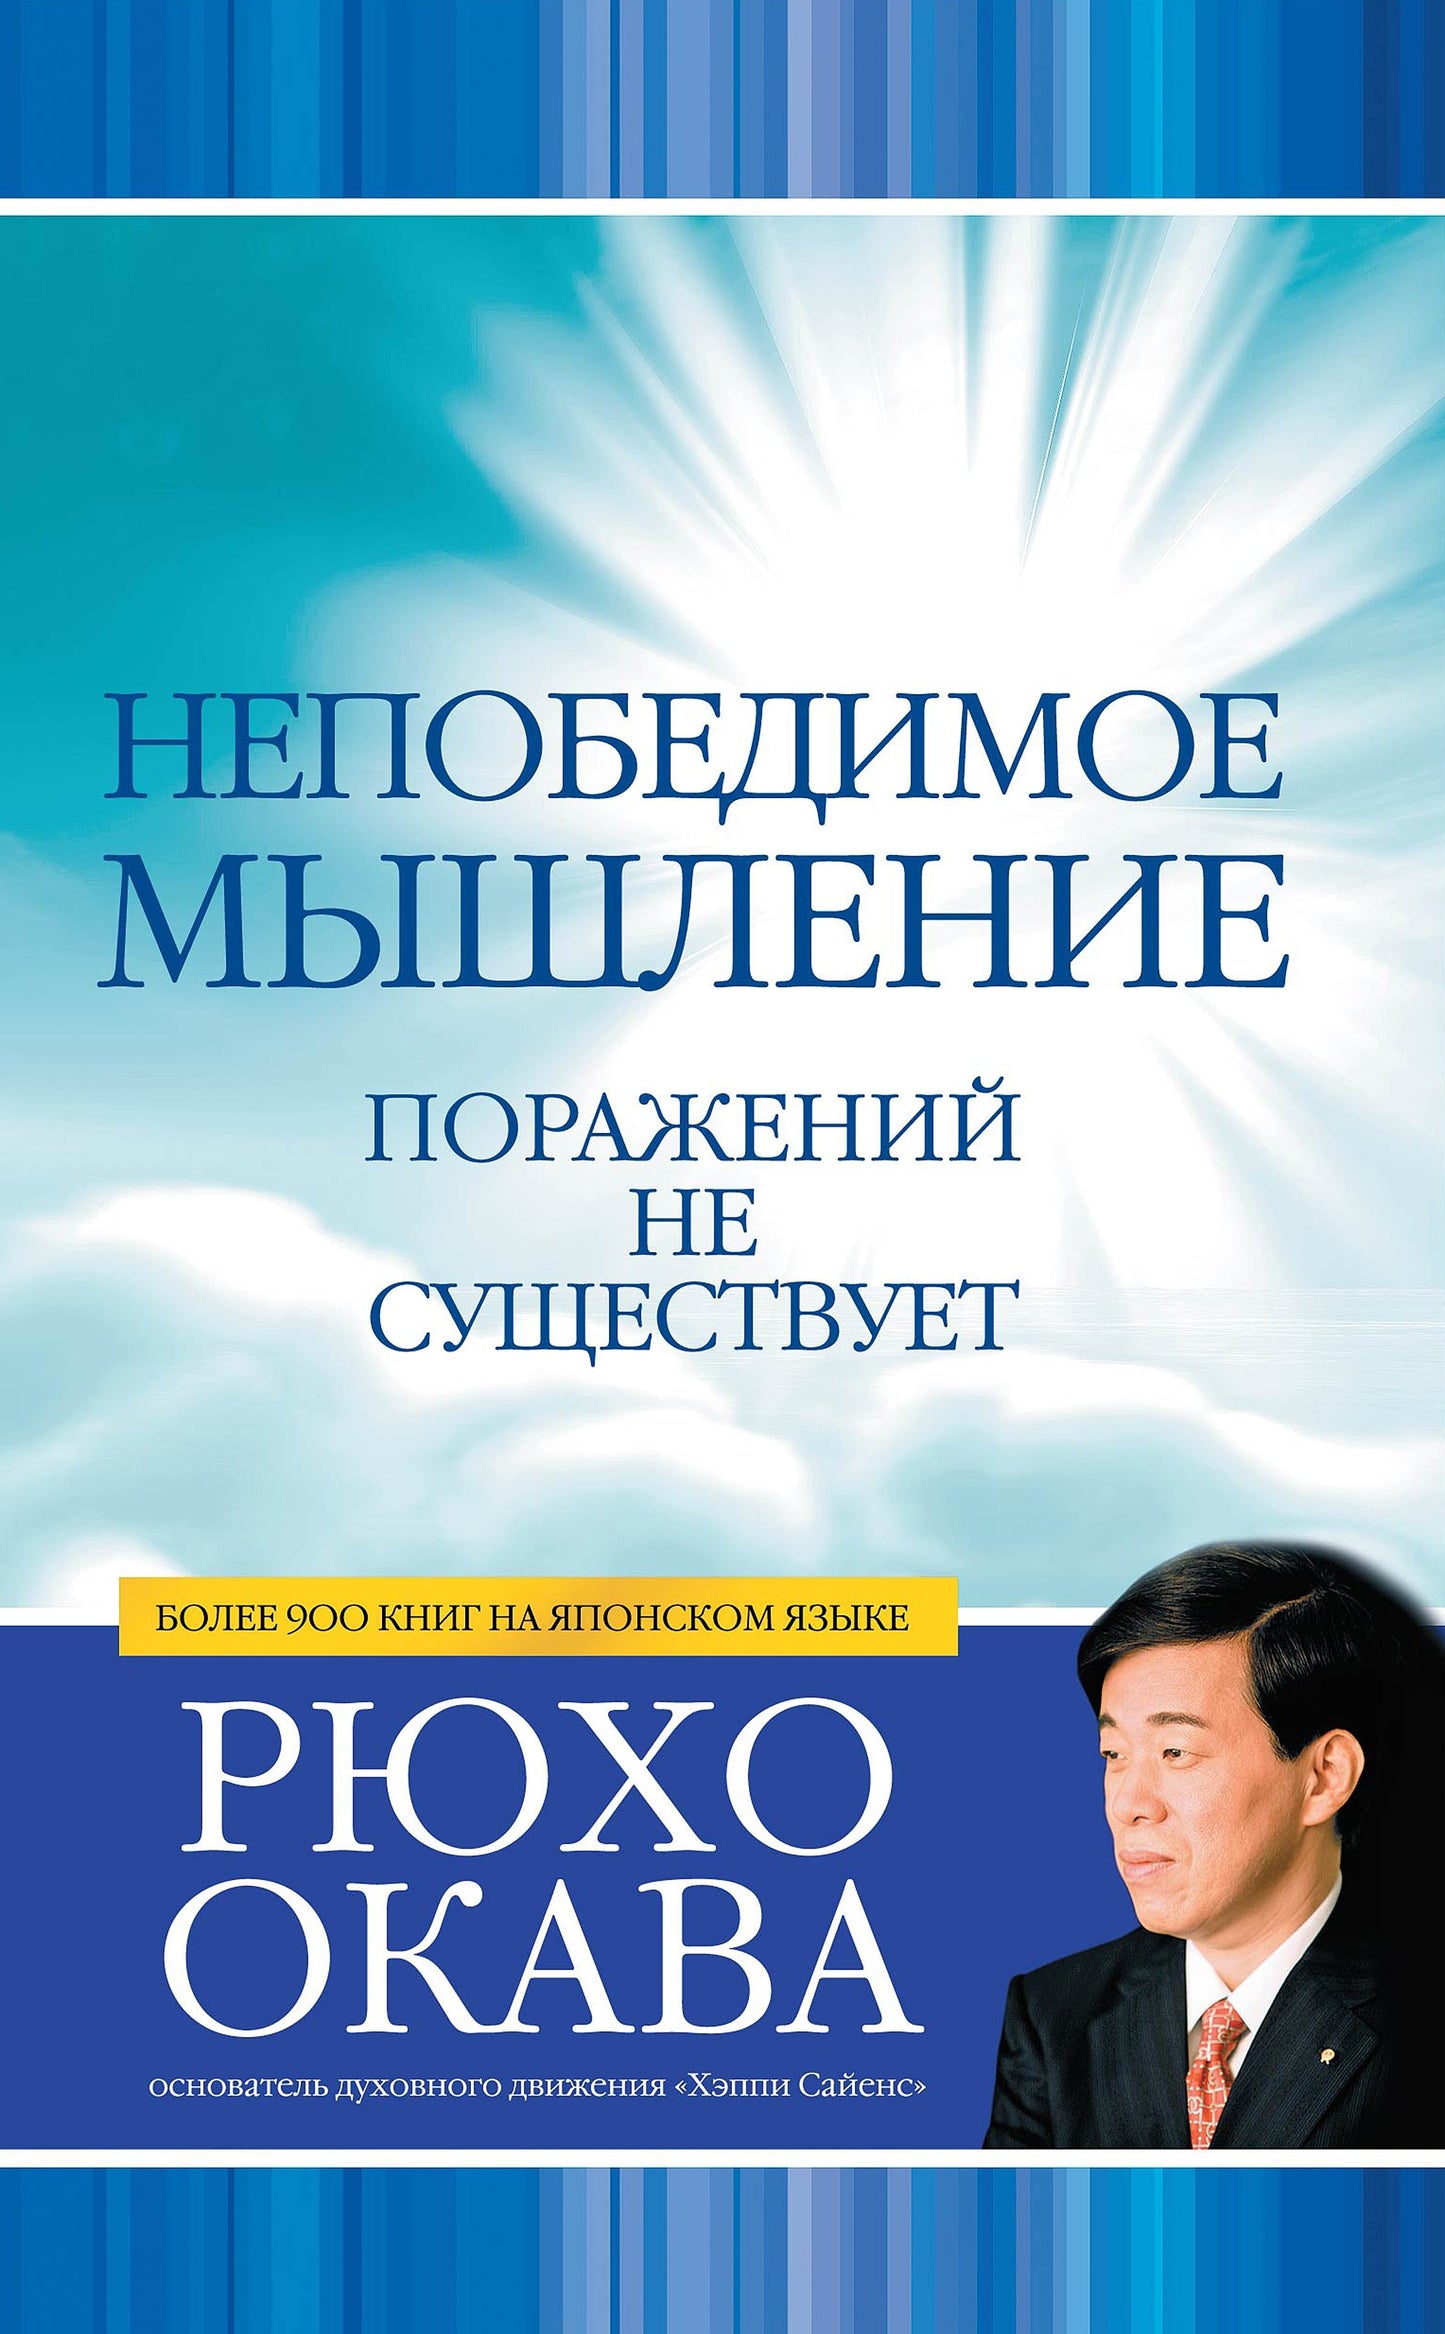 Book, Invincible Thinking : An Essential Guide for a Lifetime of Growth, Success, and Triumph, Ryuho Okawa,Russian - IRH Press International